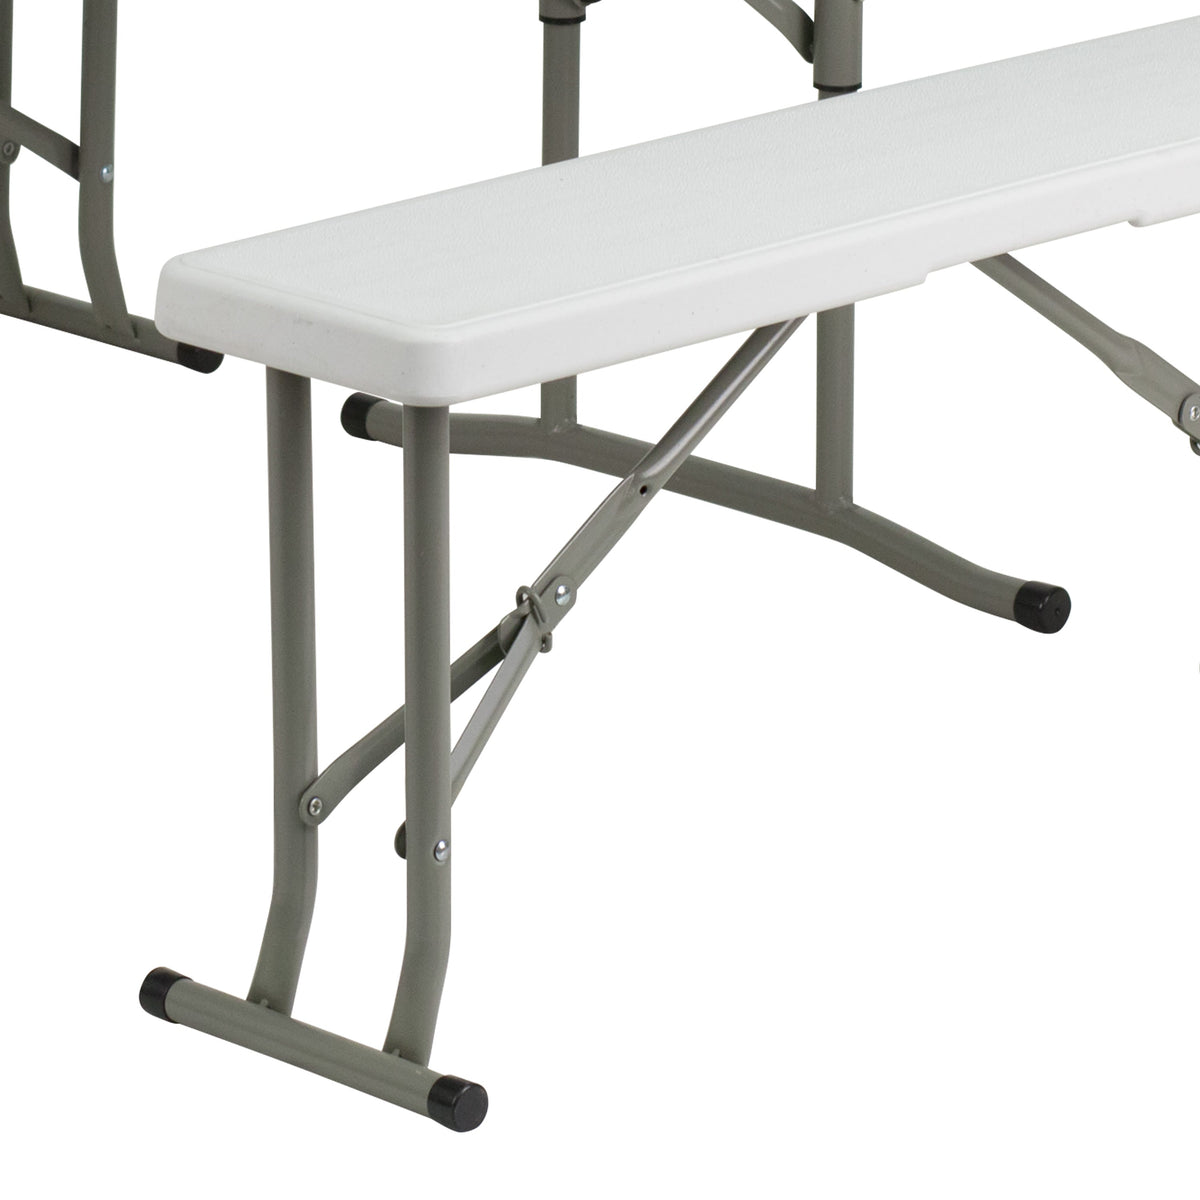 3 Piece Portable Plastic Folding Bench and Table Set